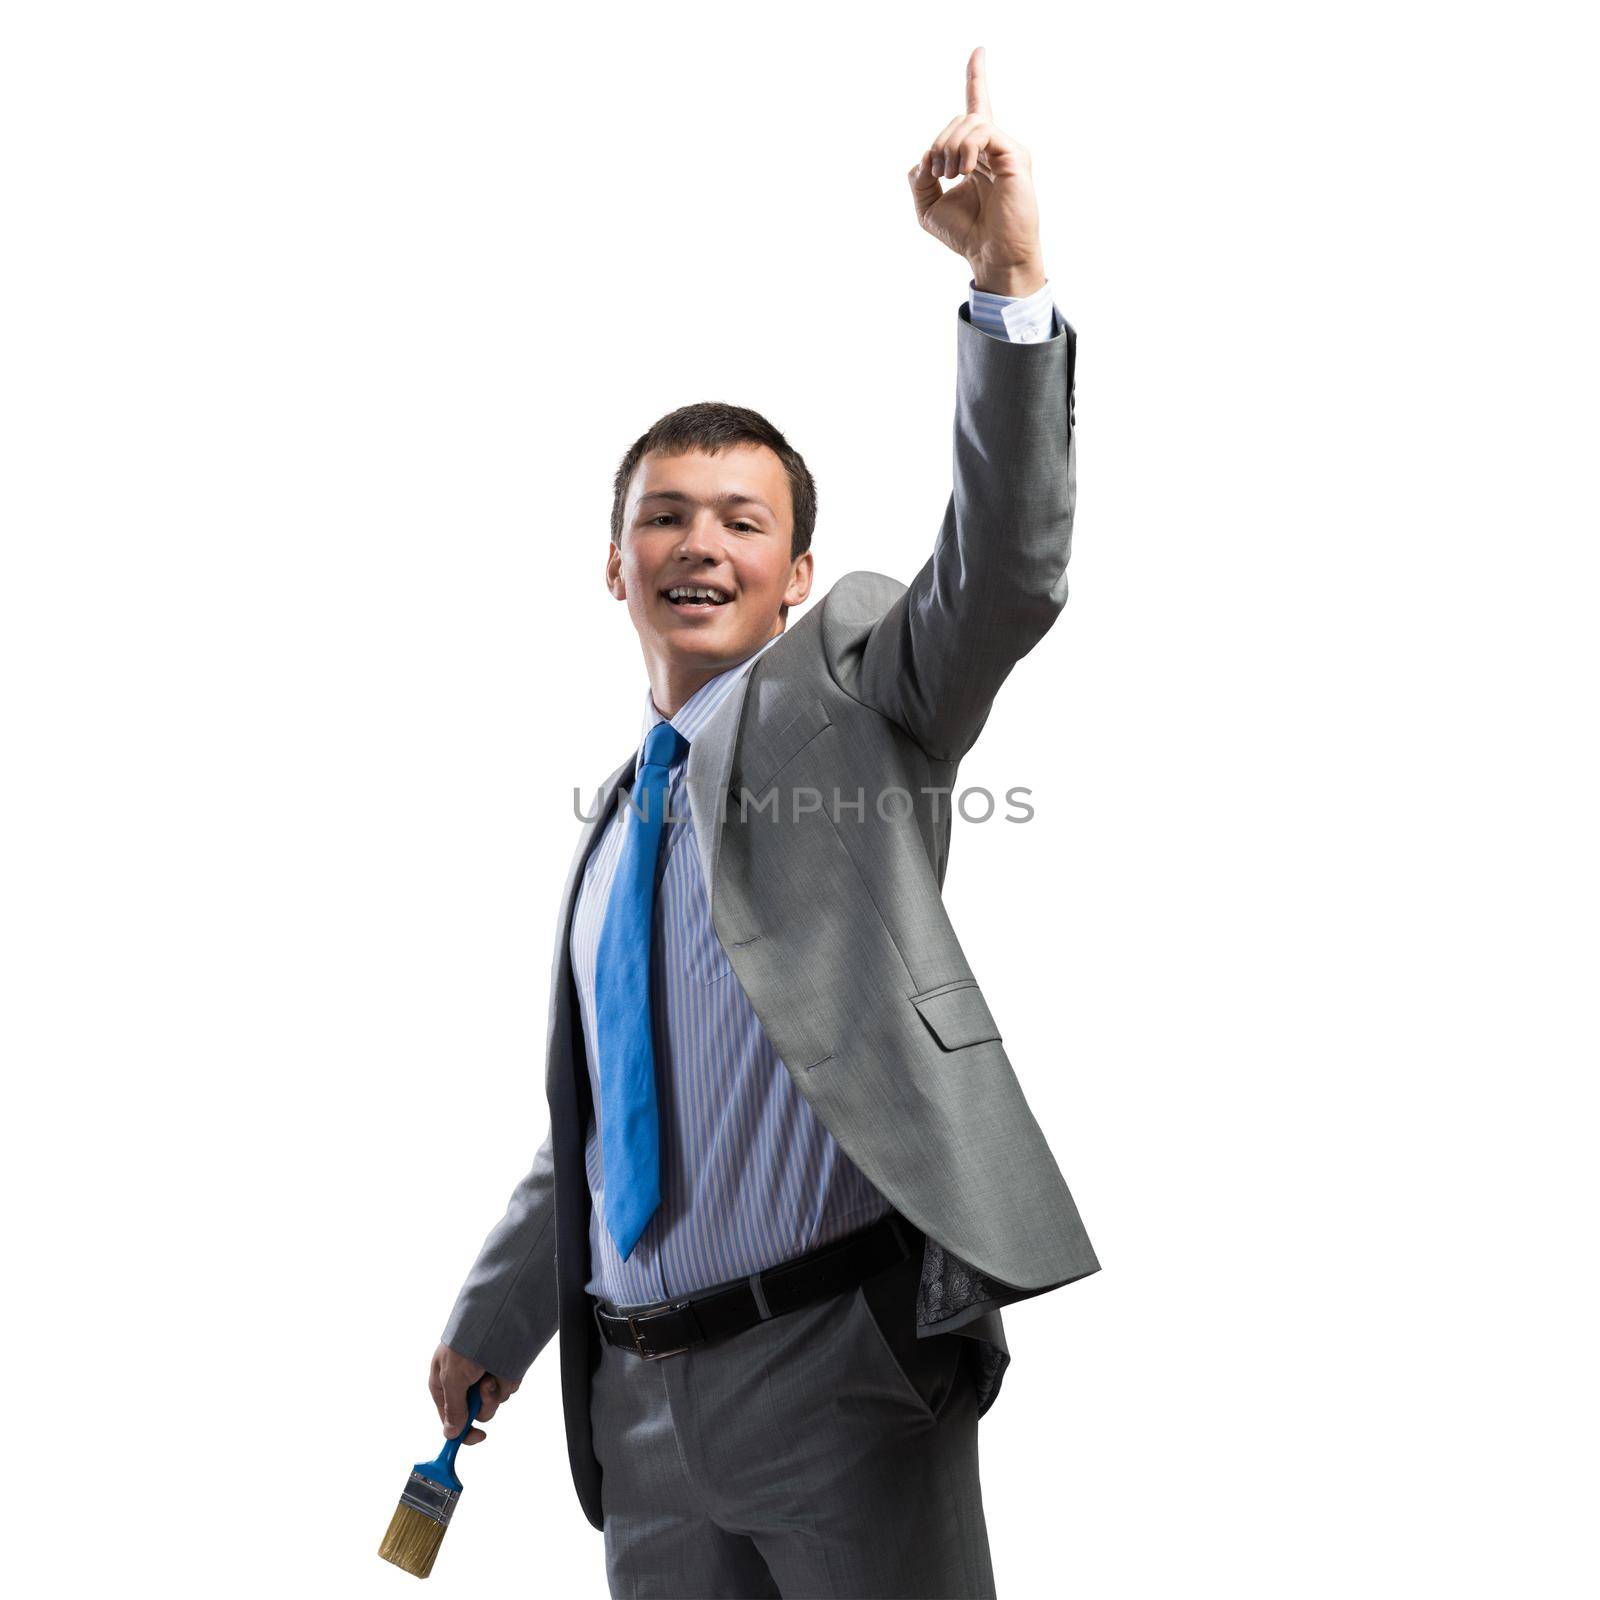 Confident and creative businessman painter finger pointing upwards. Portrait of happy handsome man in business suit and tie isolated on white background. Ambitions and creativity in business.